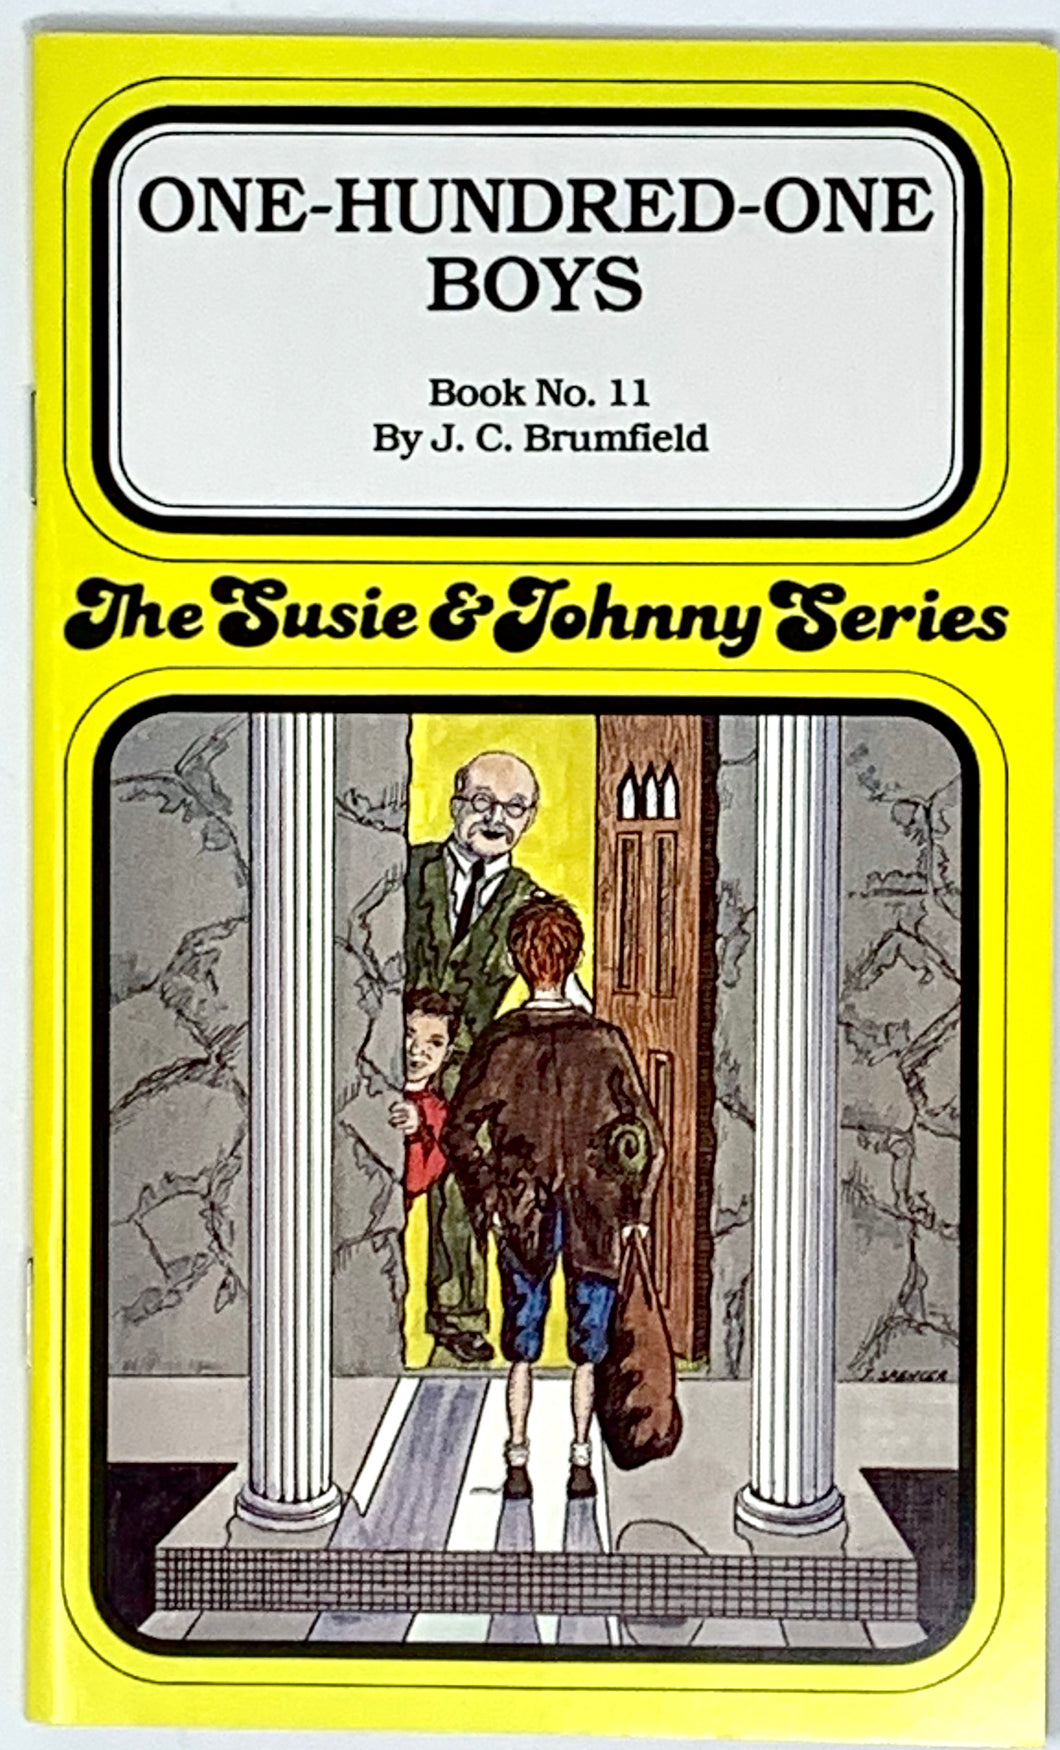 THE SUSIE & JOHNNY SERIES BOOK #11 